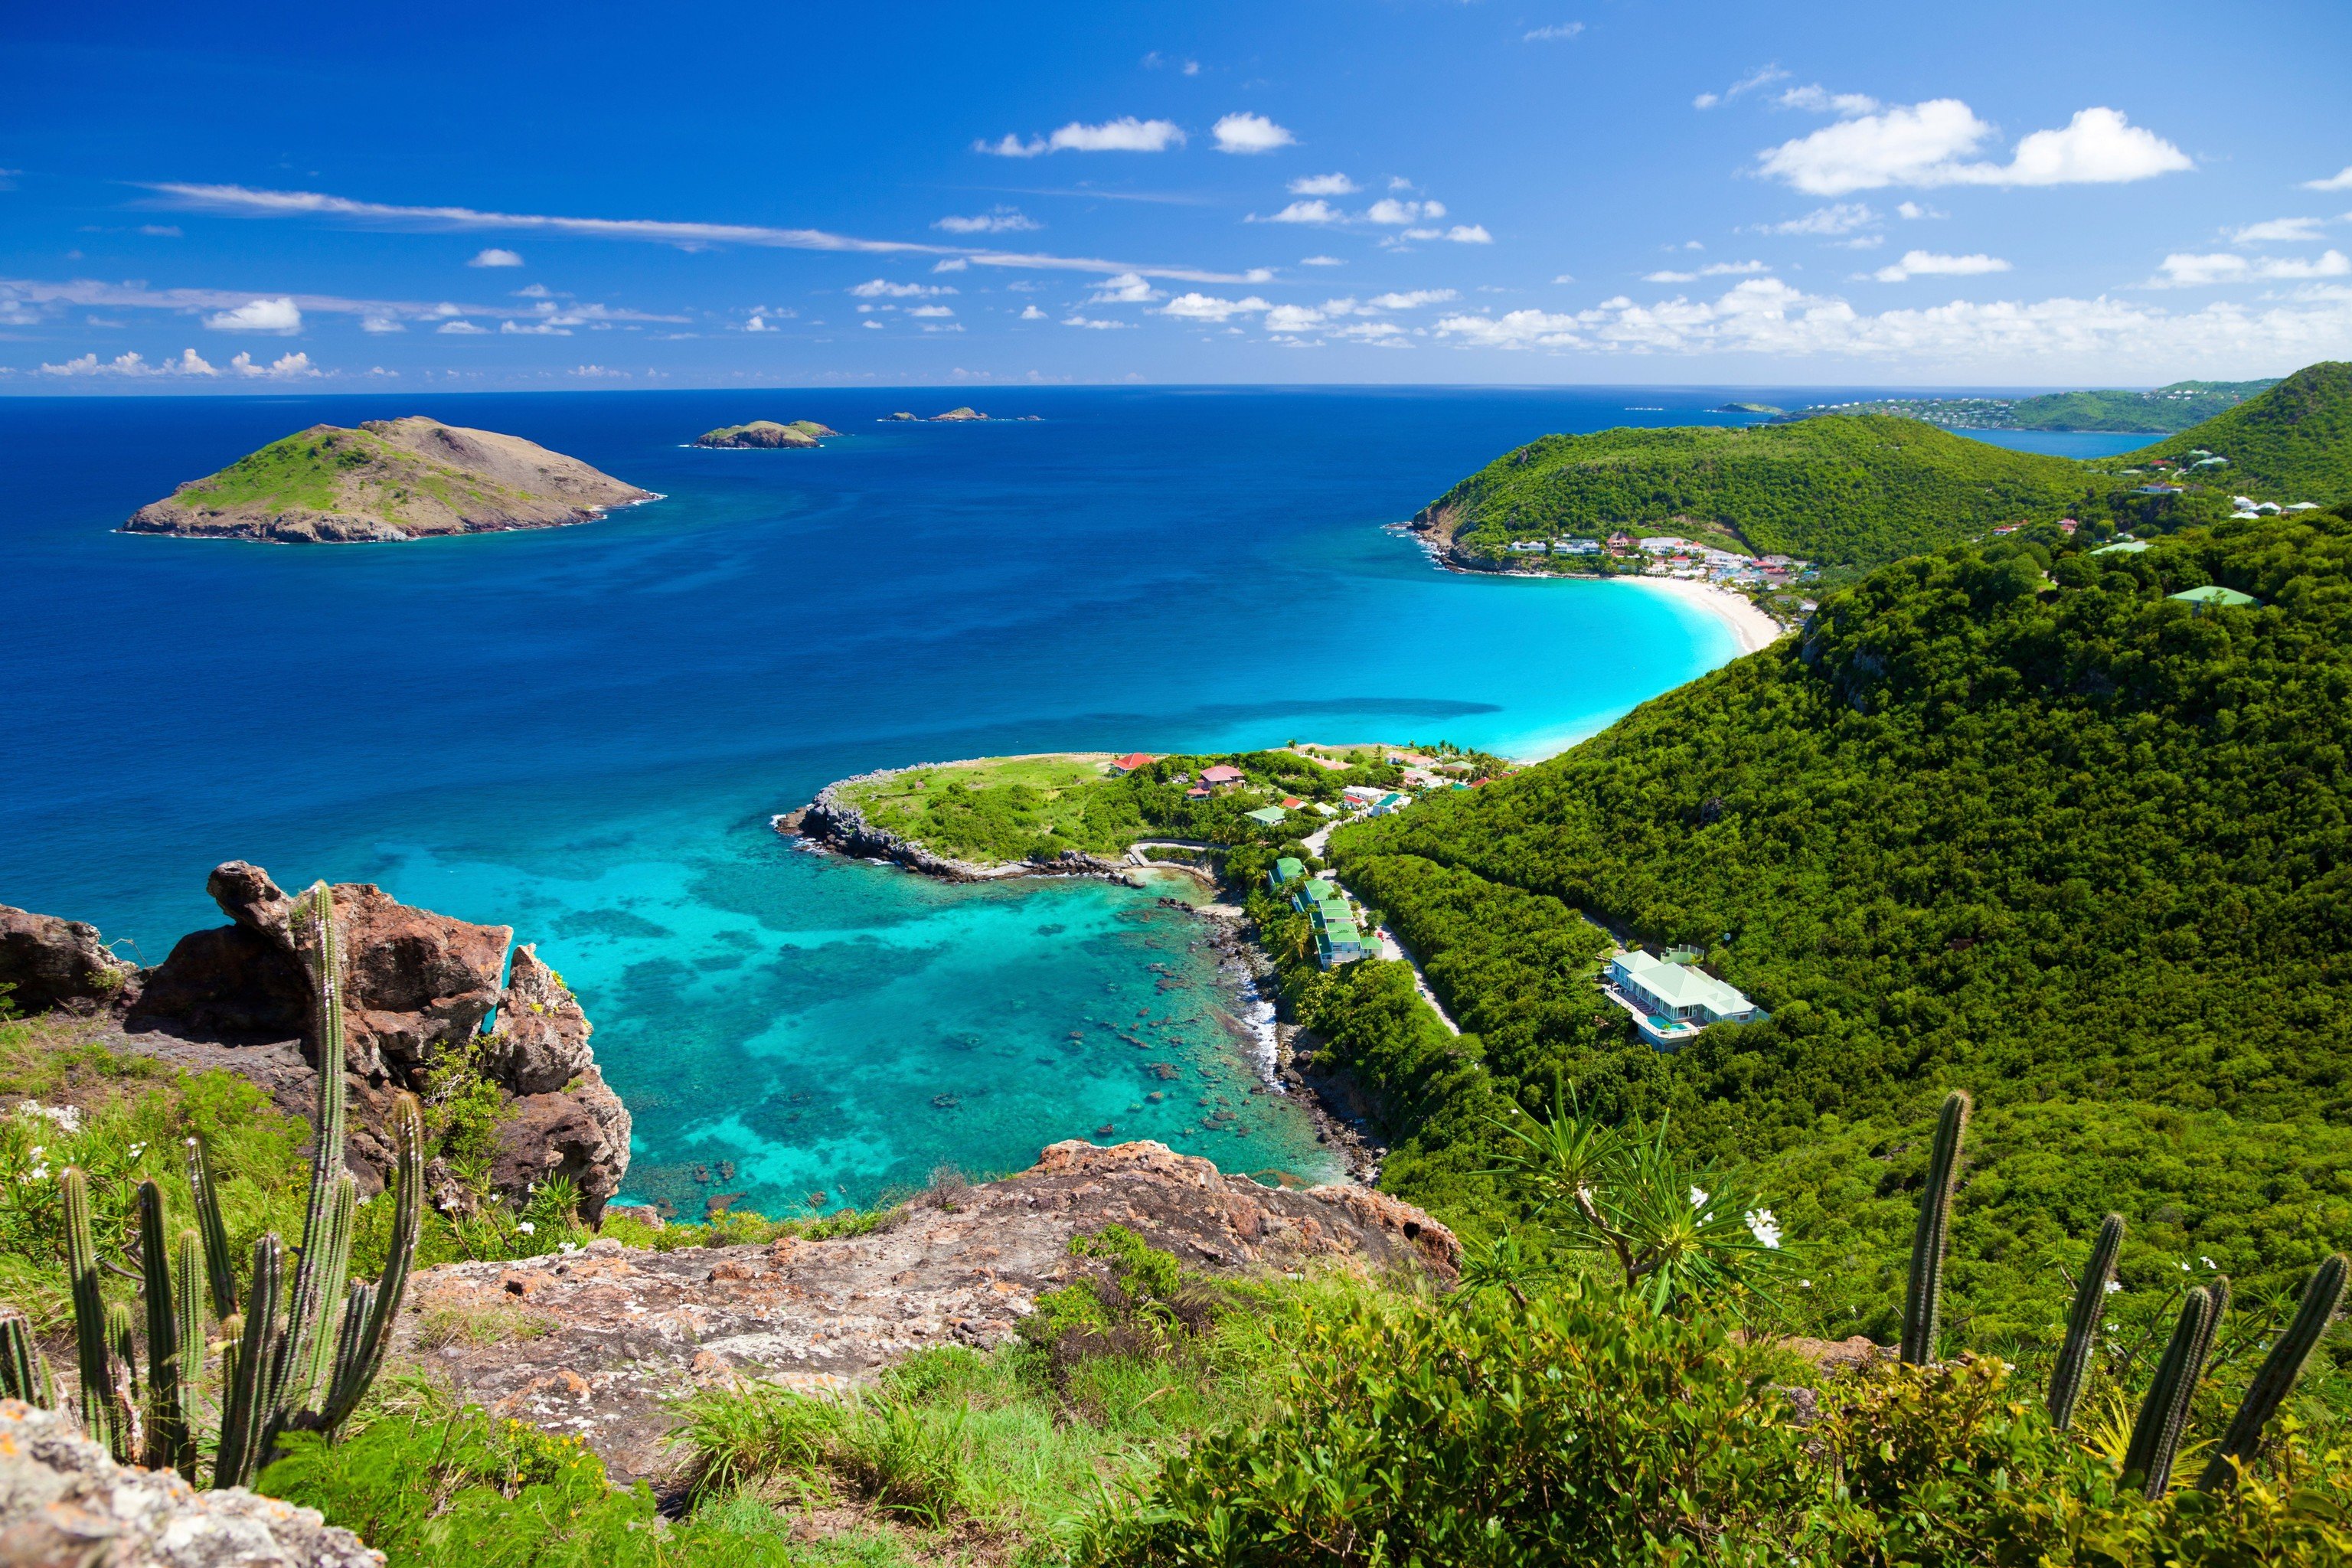 Visit St. Barthelemy: 2023 Travel Guide for St. Barthelemy, Caribbean